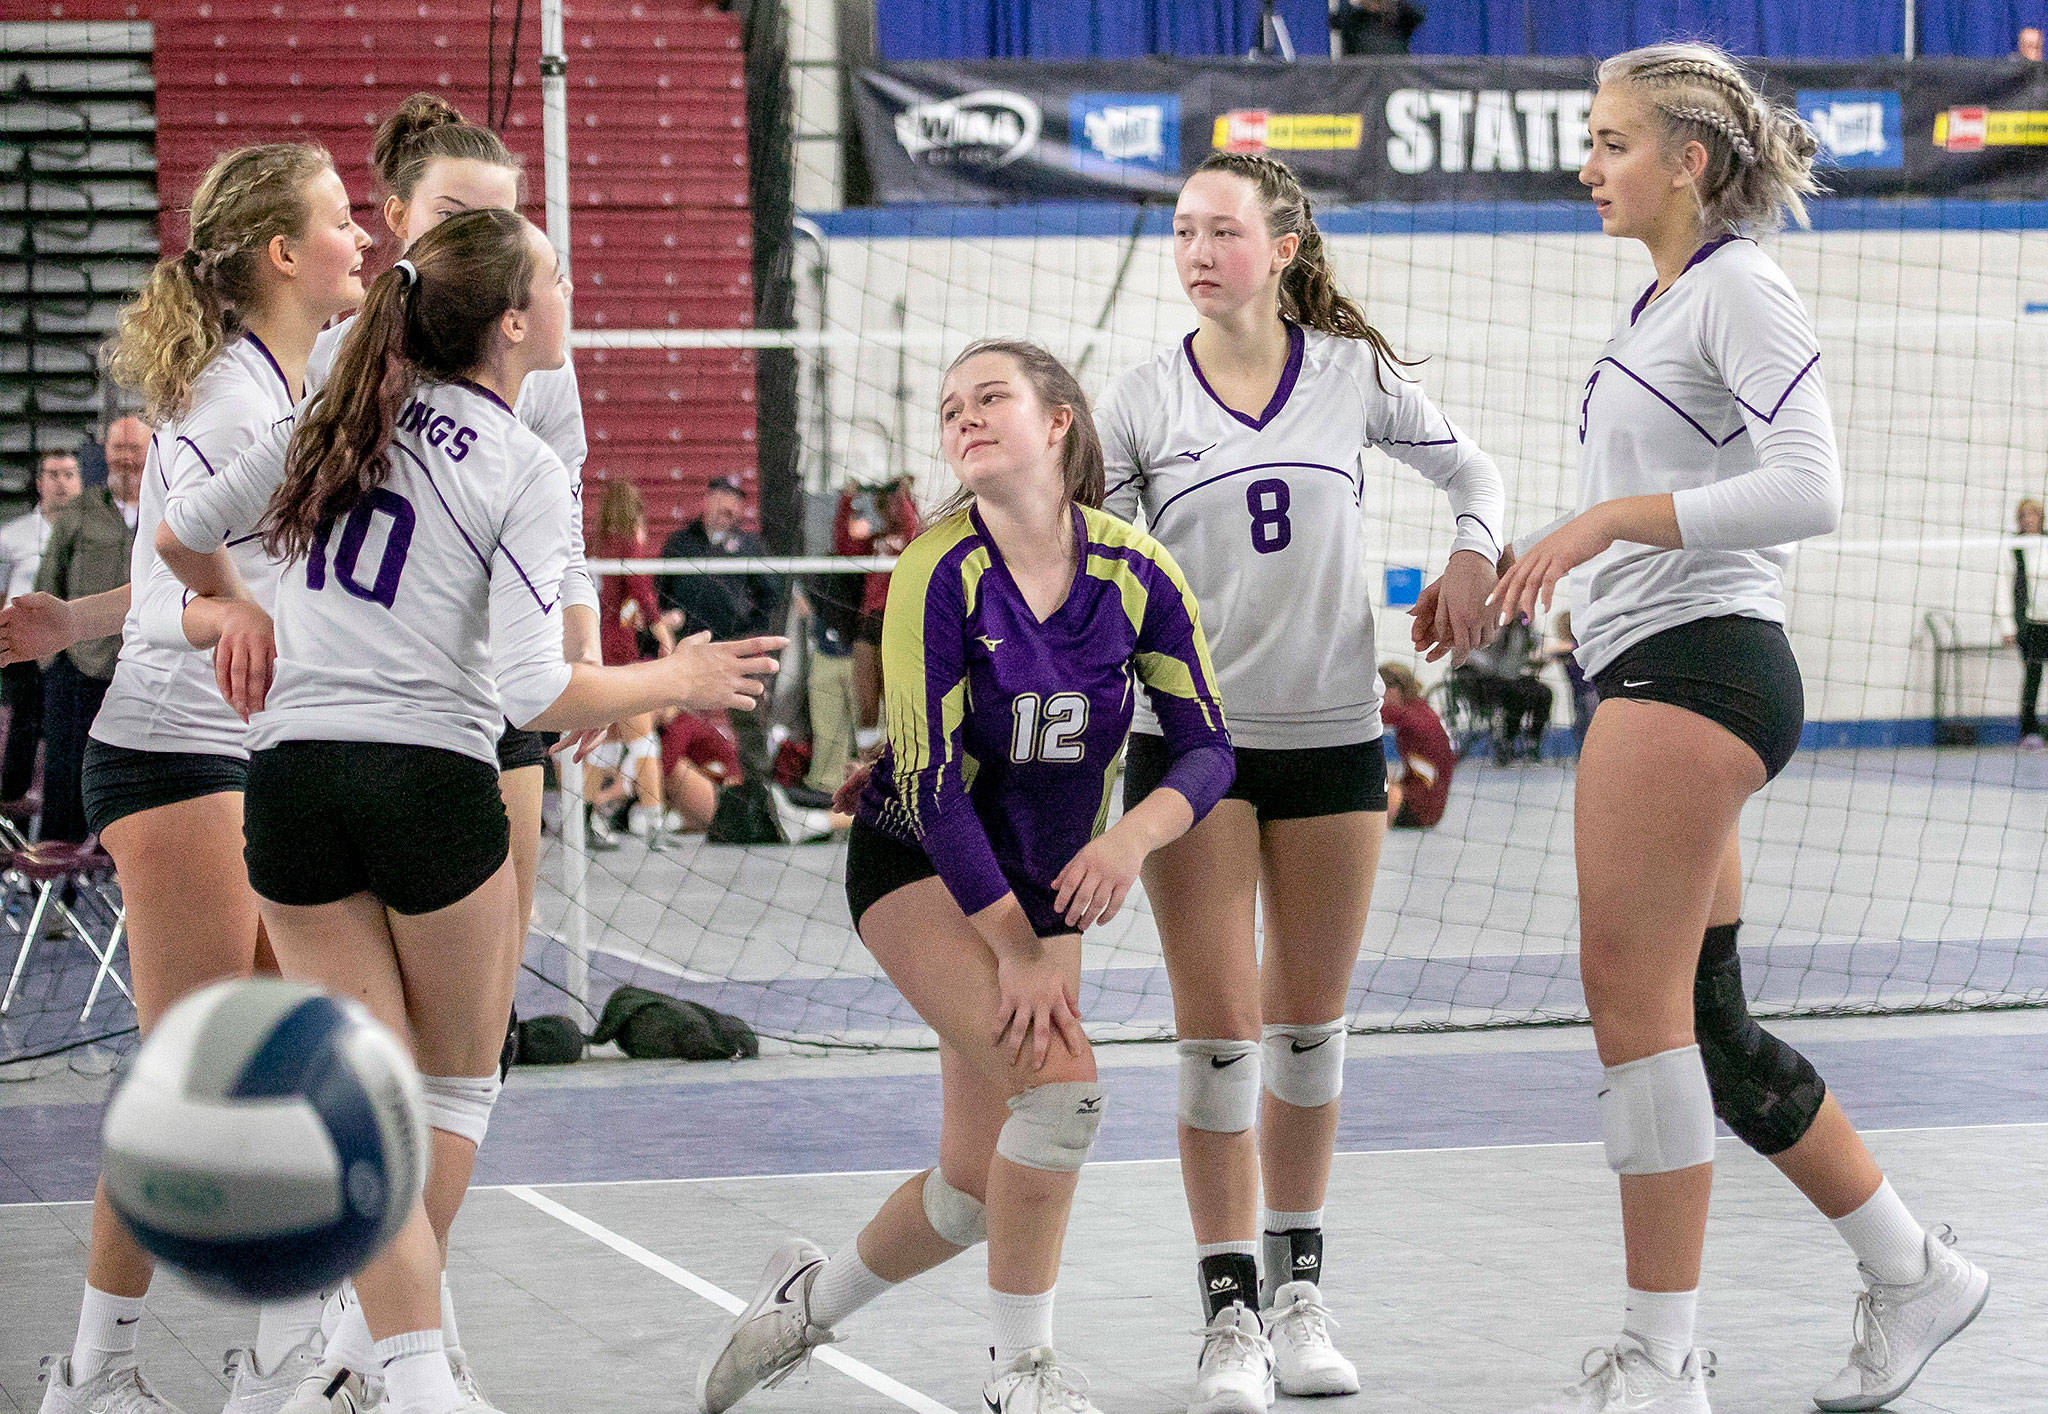 Lake Stevens players react during the Class 4A volleyball state championship match against Tahoma on Saturday night in the Yakima Valley SunDome. The Vikings suffered a four-set loss in their first-ever state final appearance. (TJ Mullinax / for The Herald)